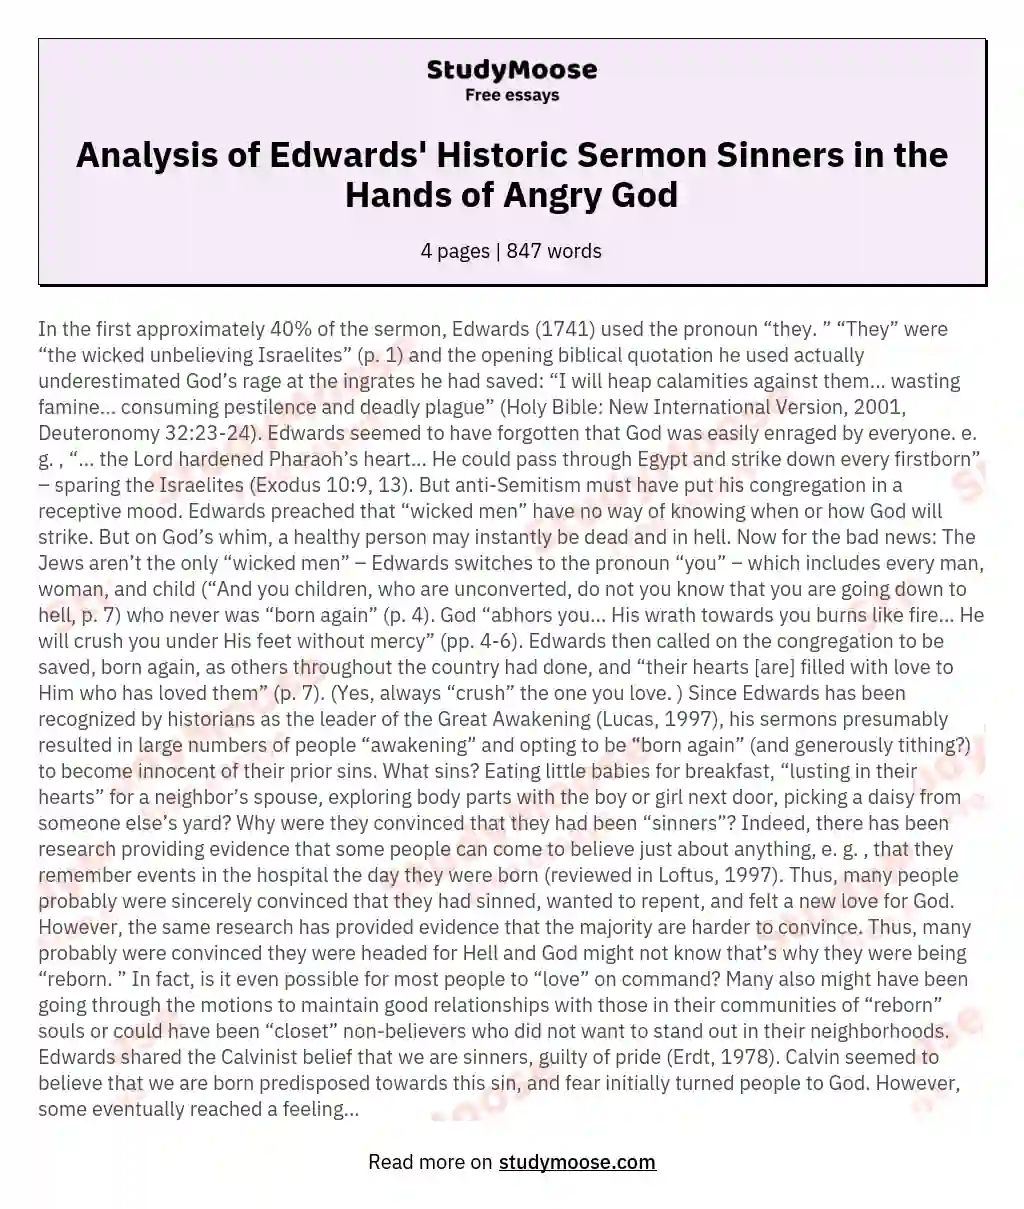 Analysis of Edwards' Historic Sermon Sinners in the Hands of Angry God essay